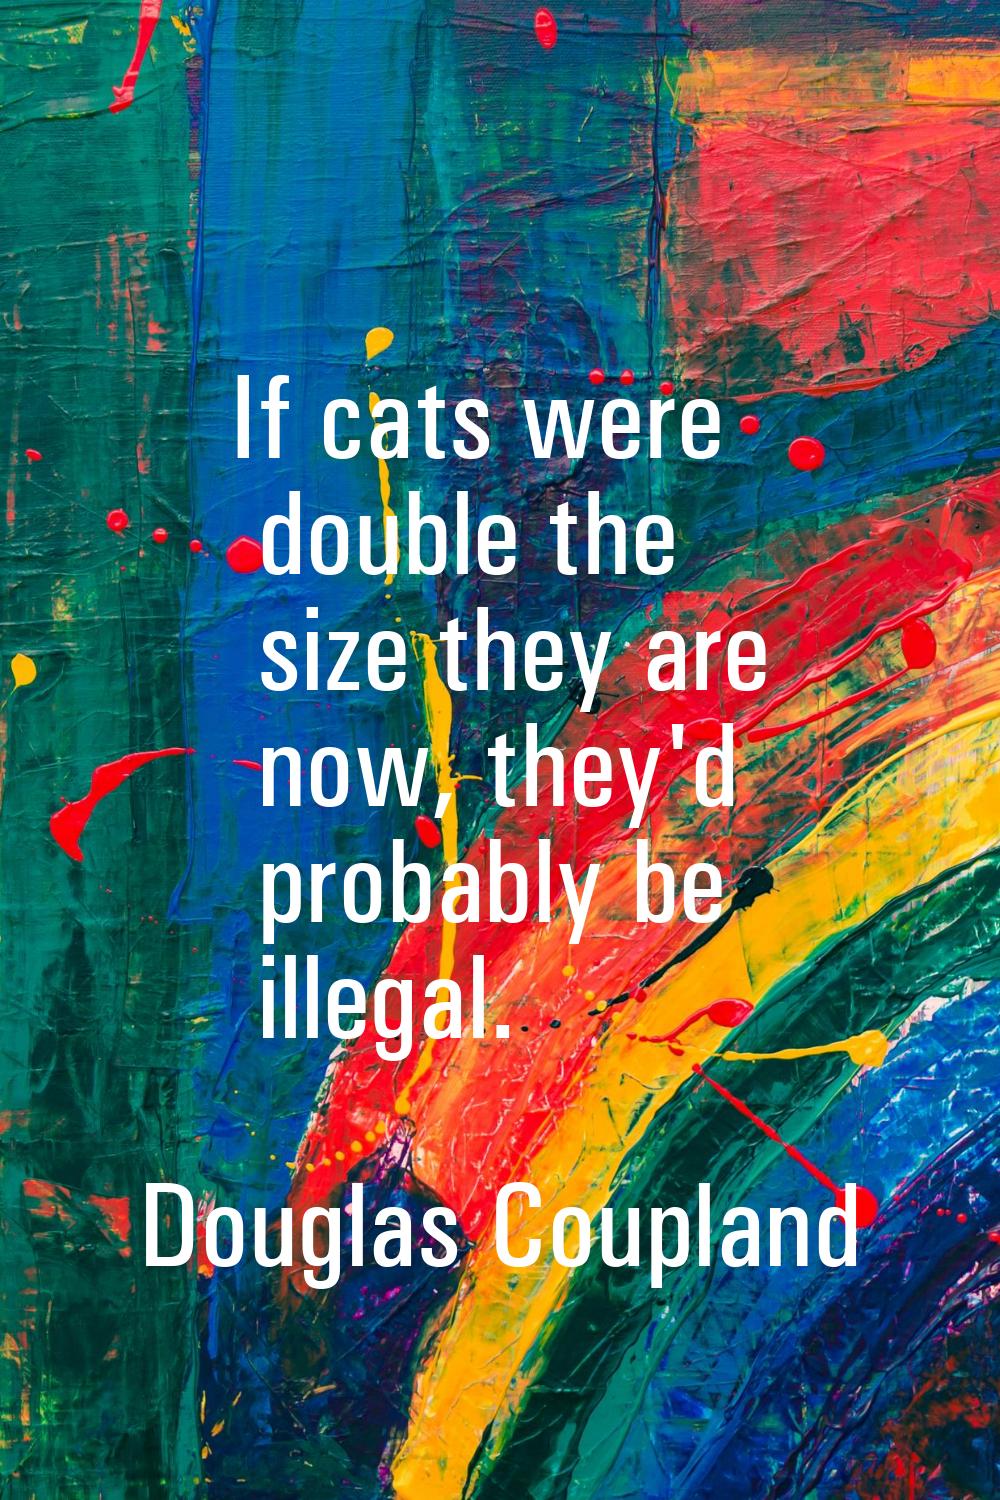 If cats were double the size they are now, they'd probably be illegal.